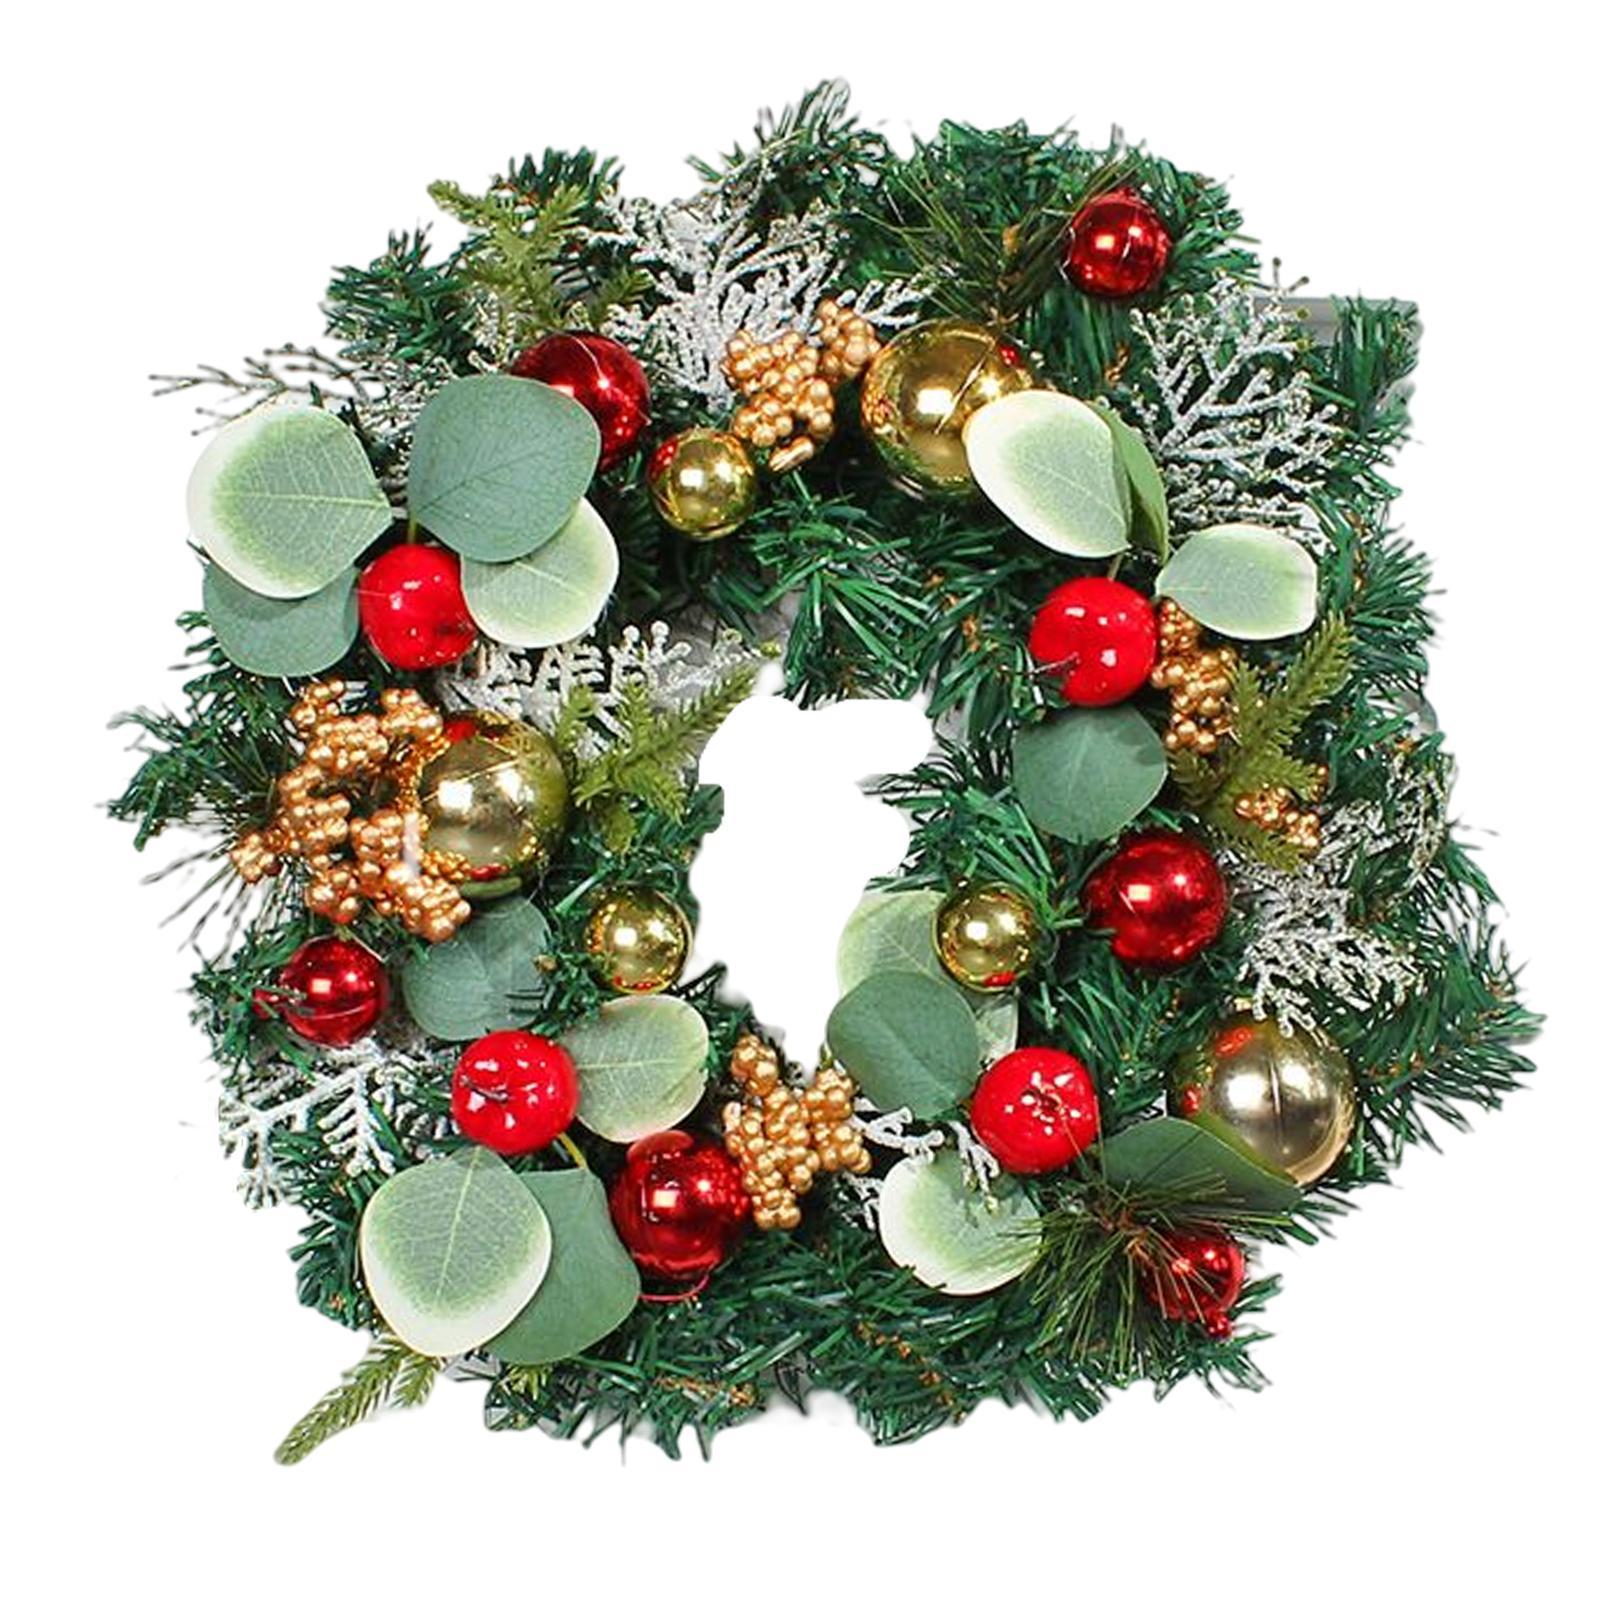 25+ garland decorations for christmas That Will Make Your Home Festive and Cozy